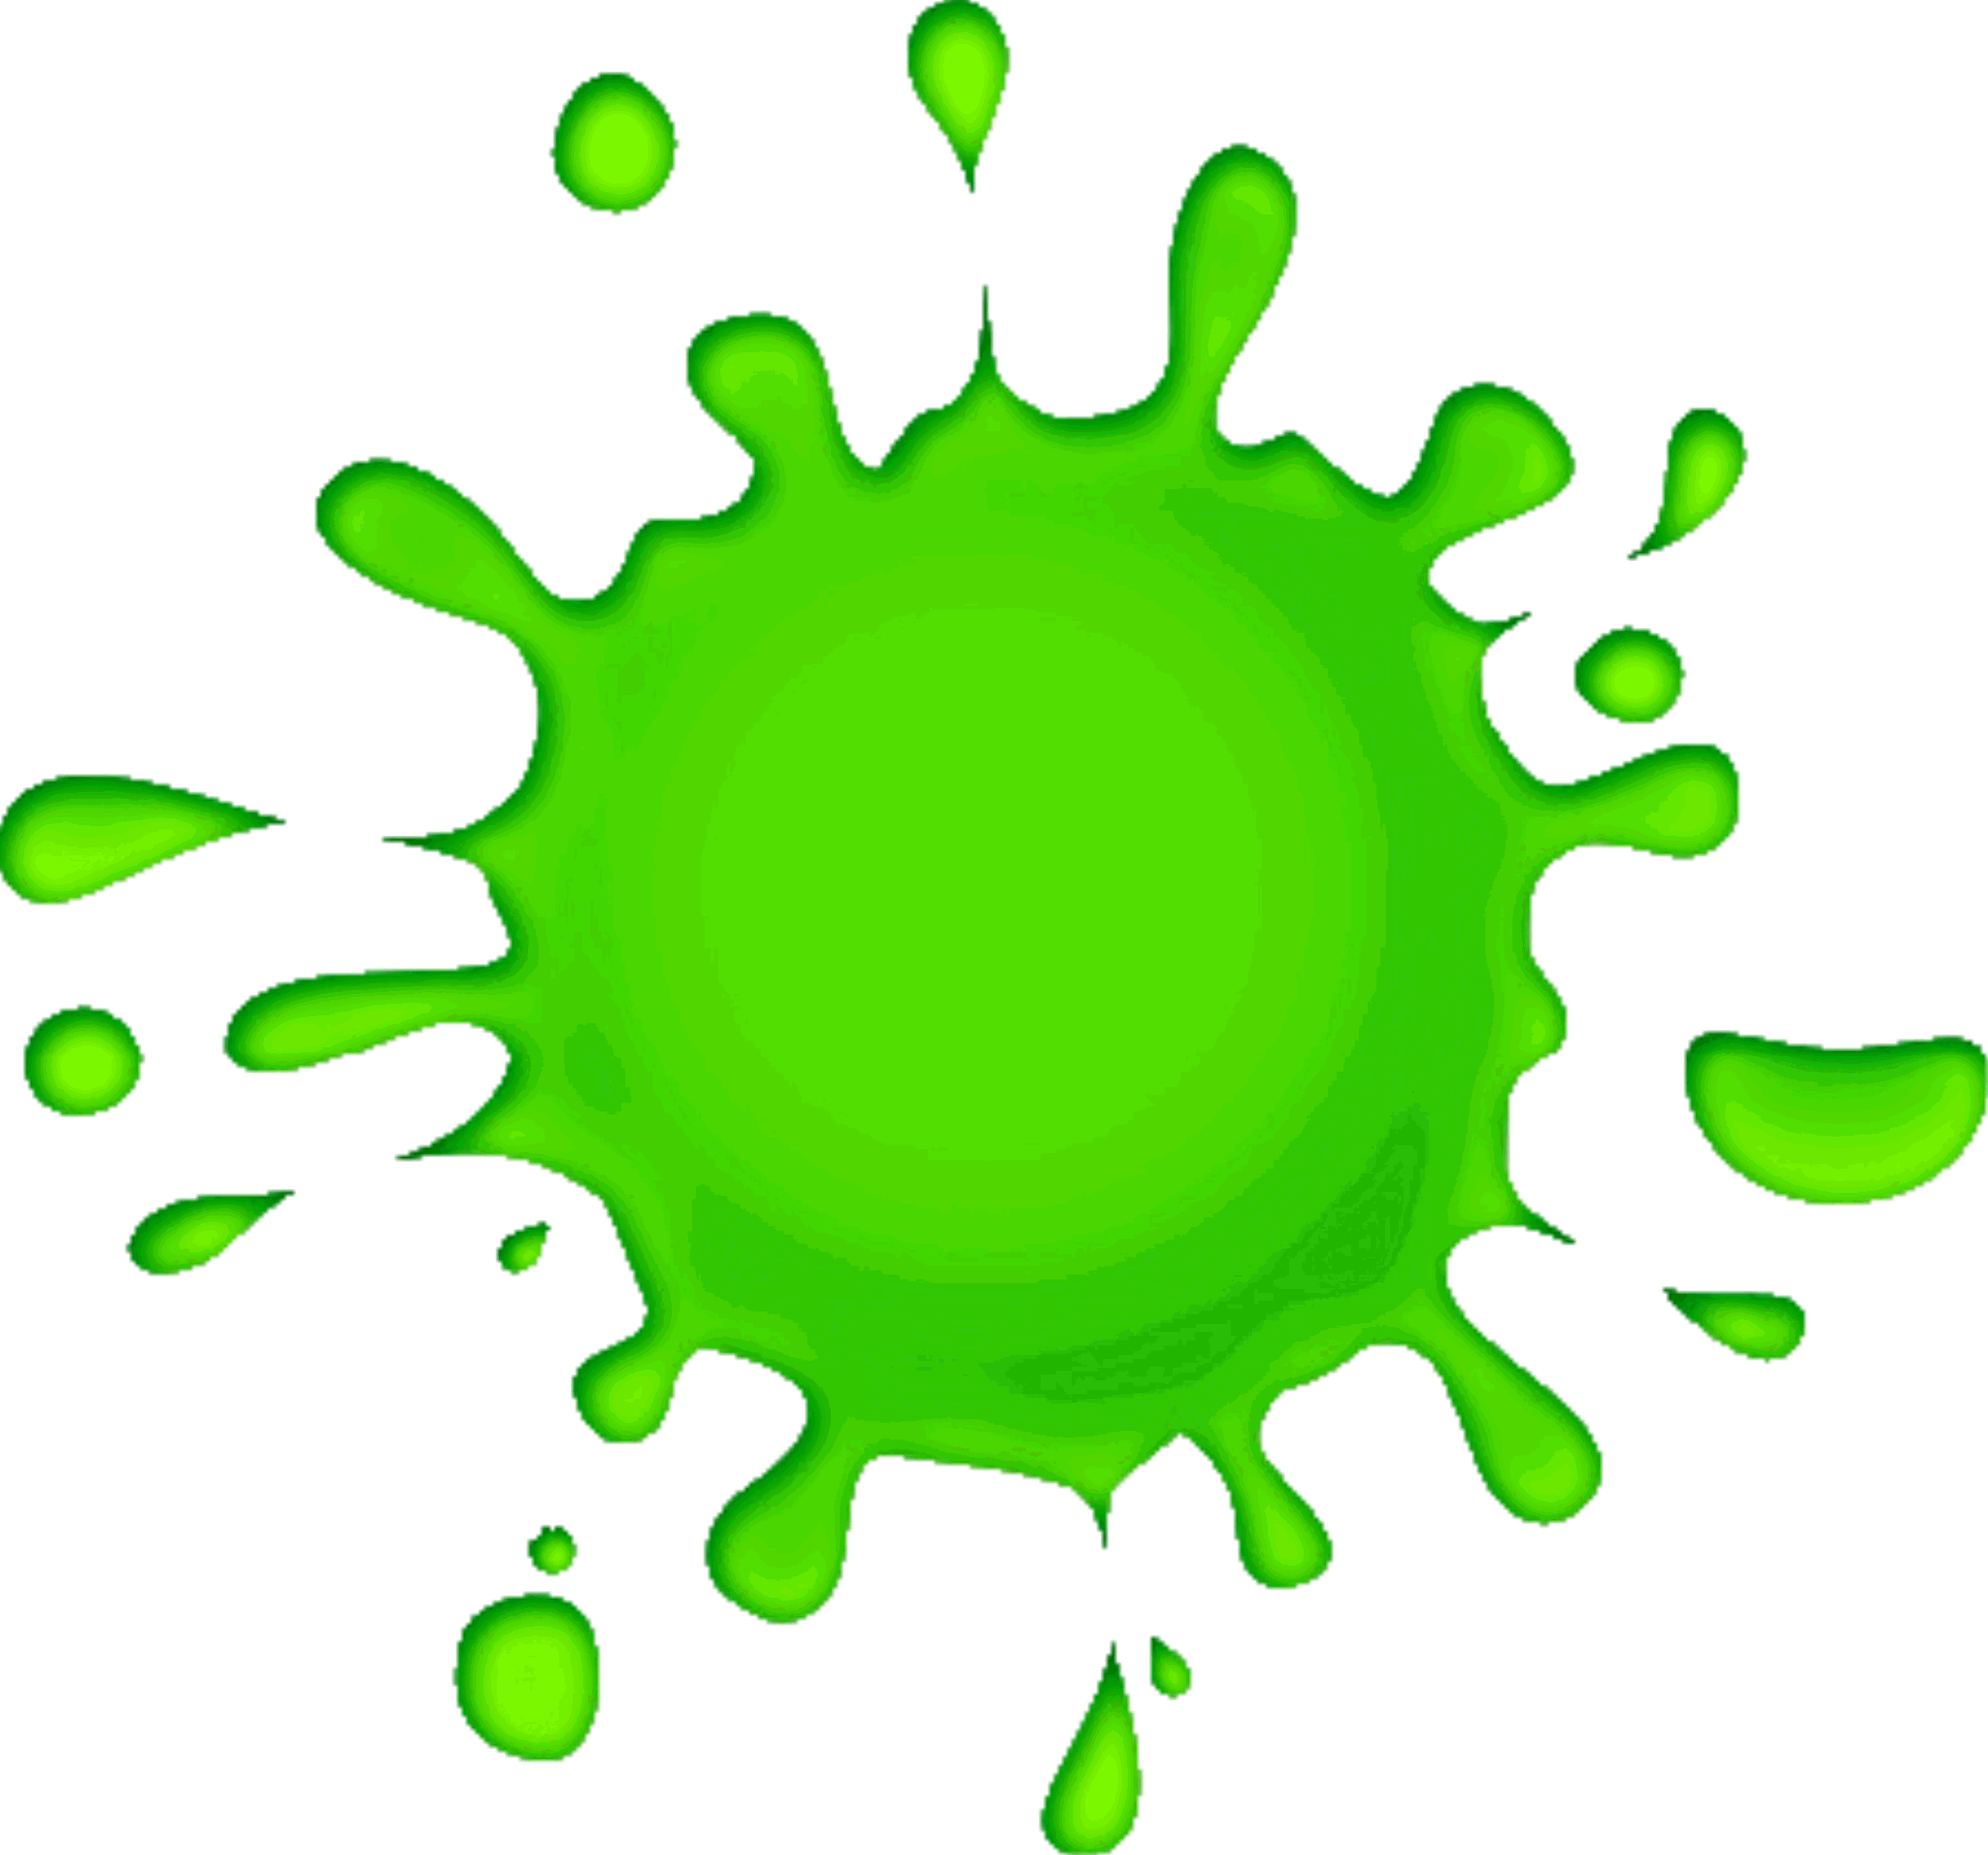 Clipart images of slime